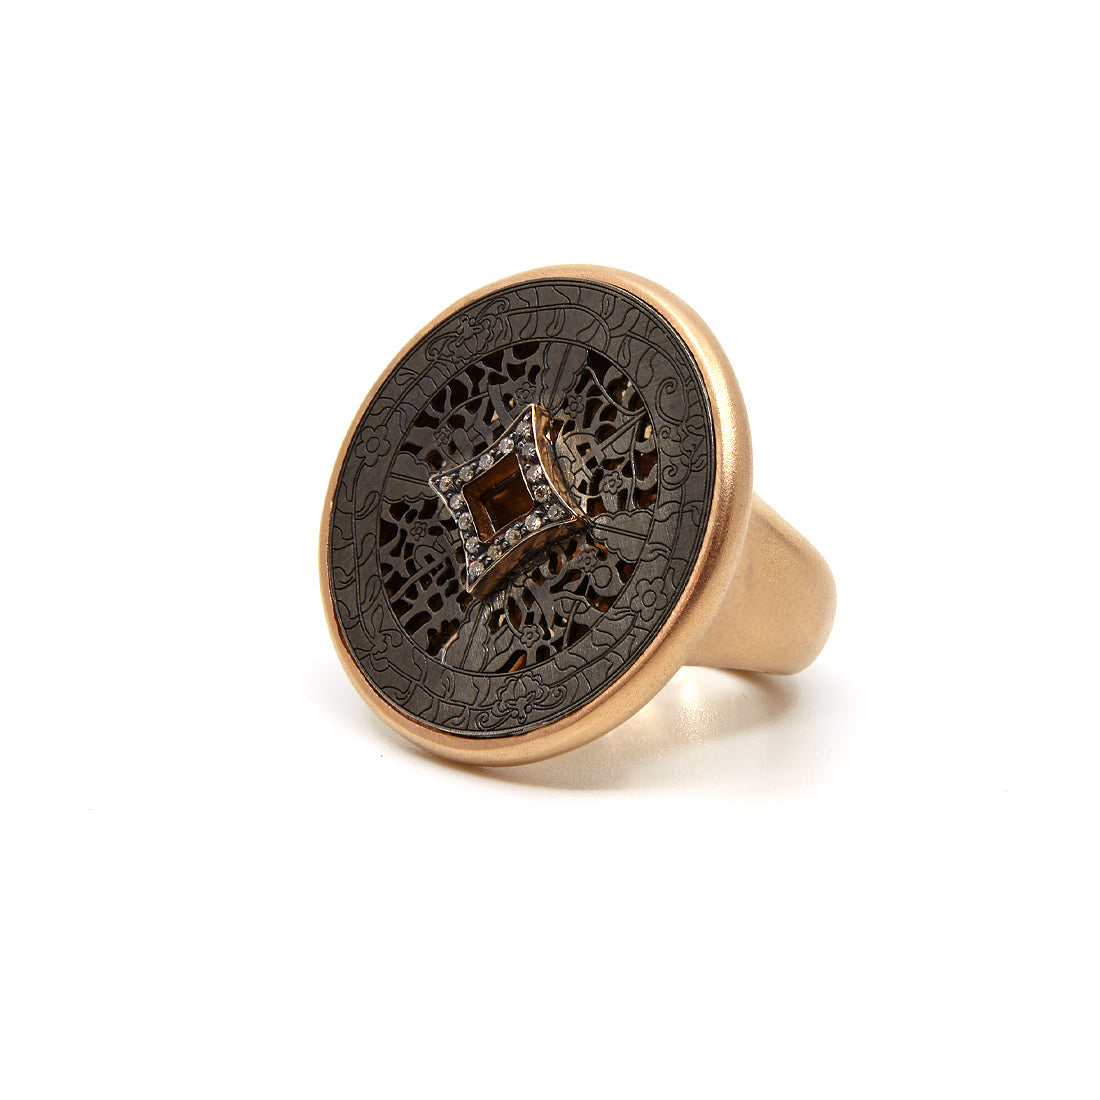 Rose gold ring with brown diamond